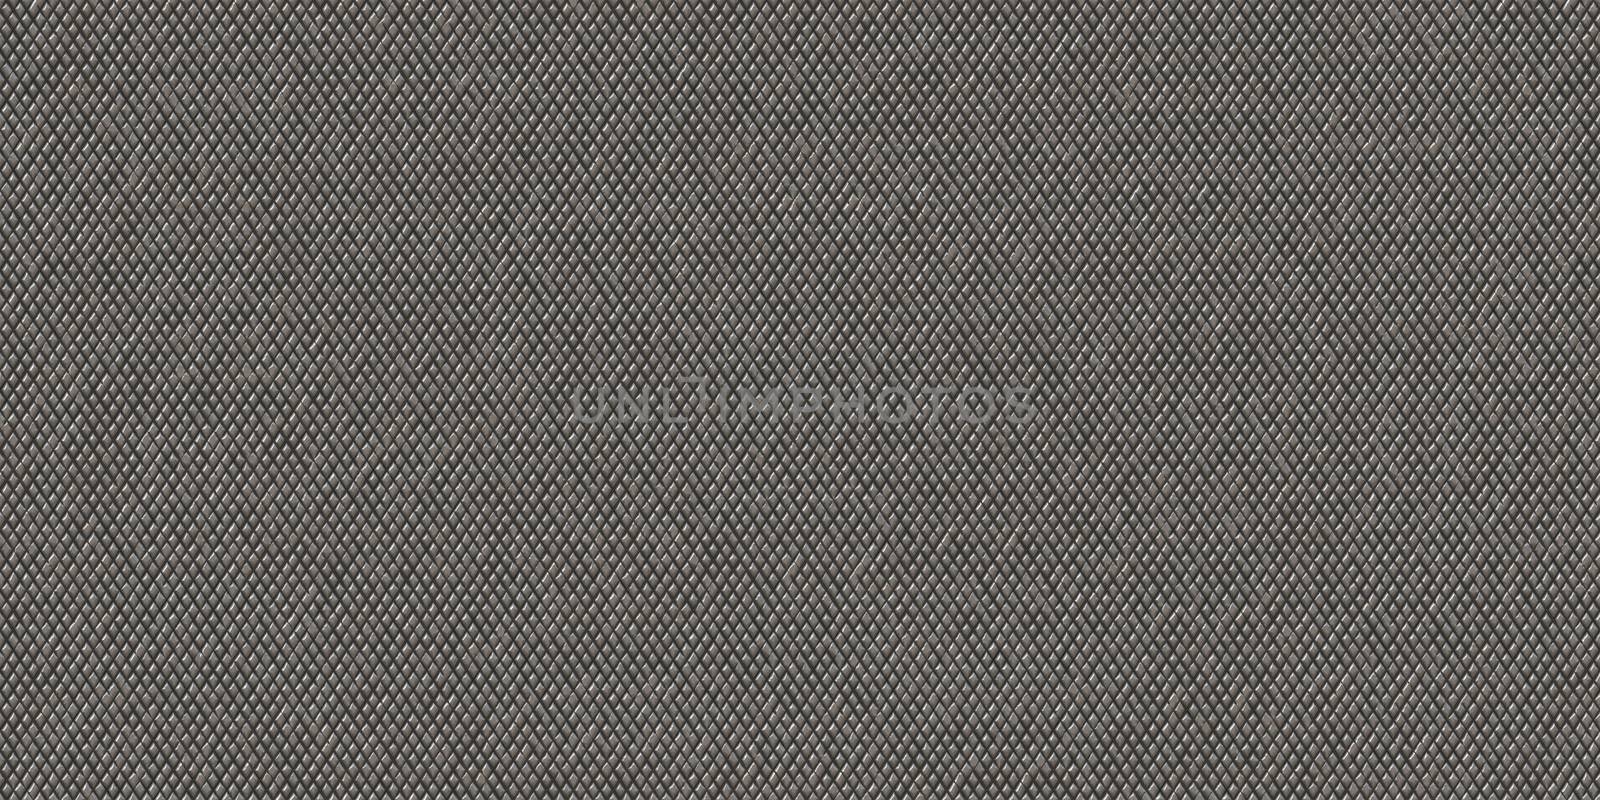 Knurl contact surface background. Metal rhombus pattern surface. Knurling touch texture. by sanches812